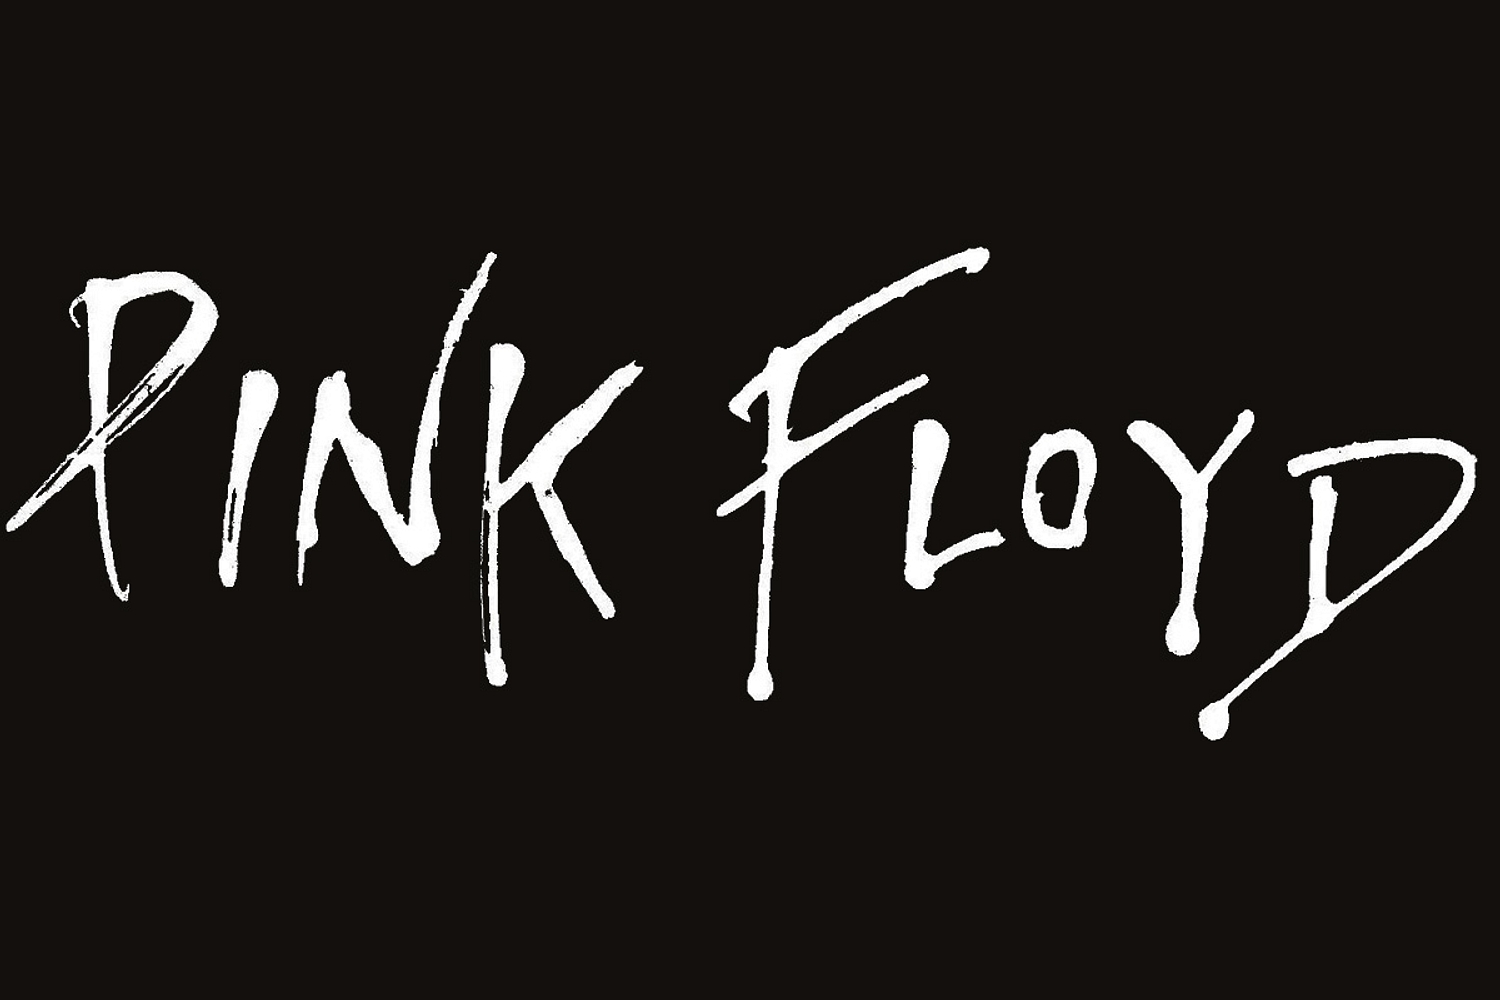 Pink Floyd’s first album in 20 years ‘The Endless River’ to be released this October